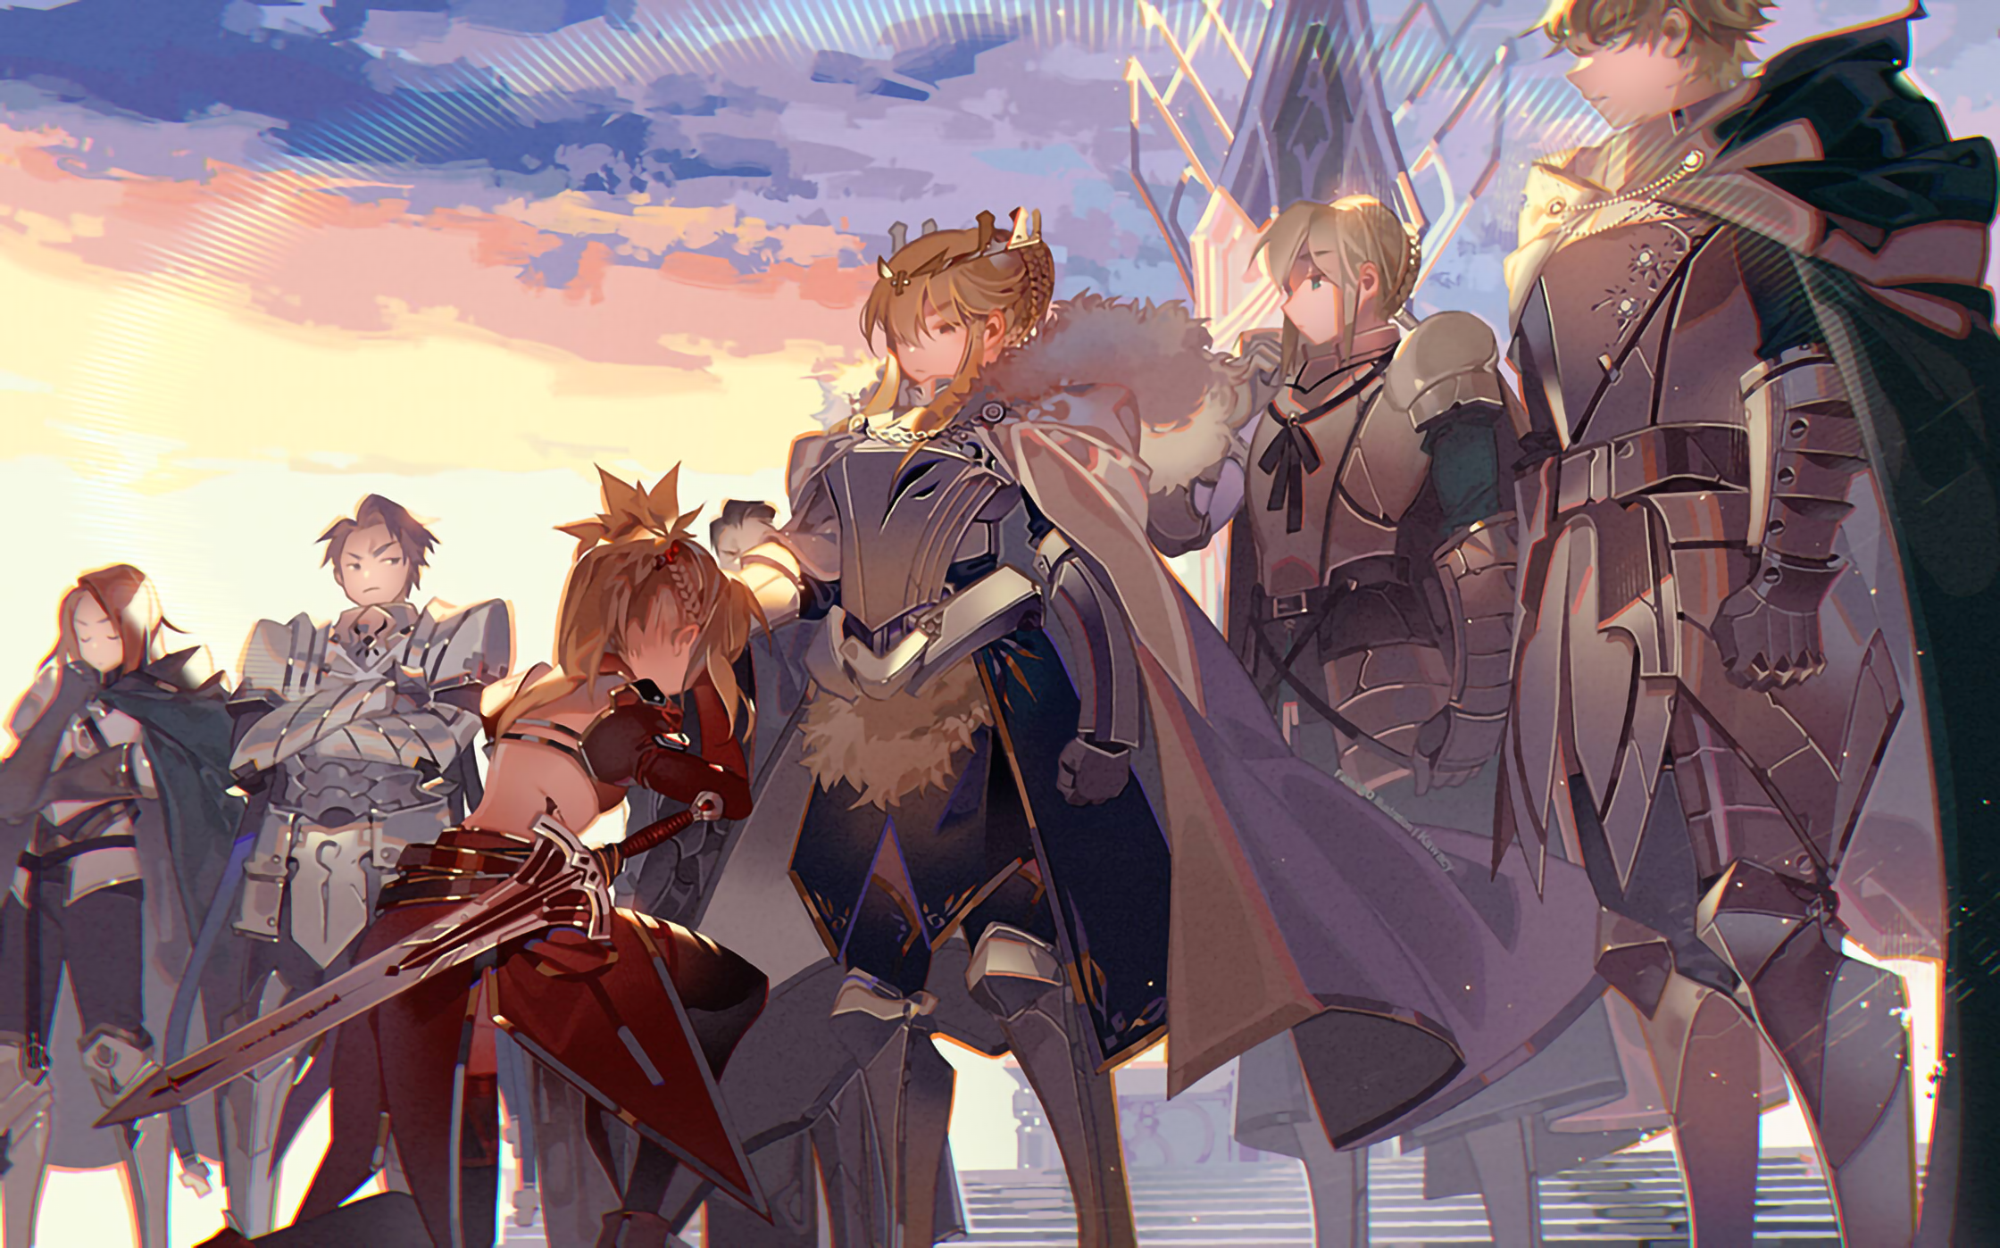 Anime 2000x1248 Fate/Grand Order Artoria Pendragon Knights of the Round Table (Fate/Grand Order) Mordred (Fate/Apocrypha) Kawacy artwork Gawain (Fate/Grand Order)